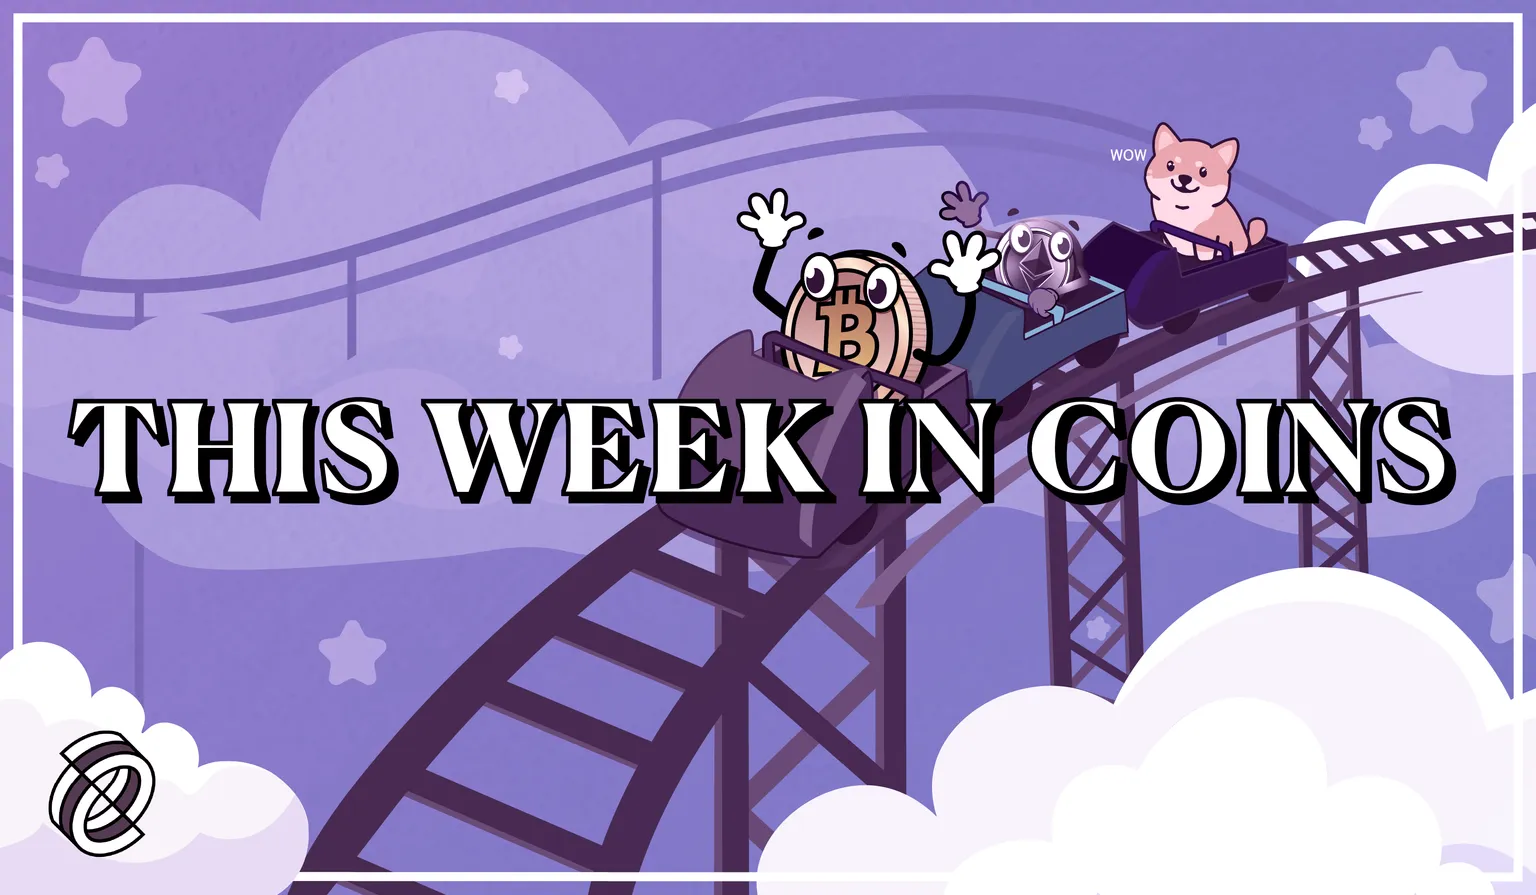 This Week in Coins final